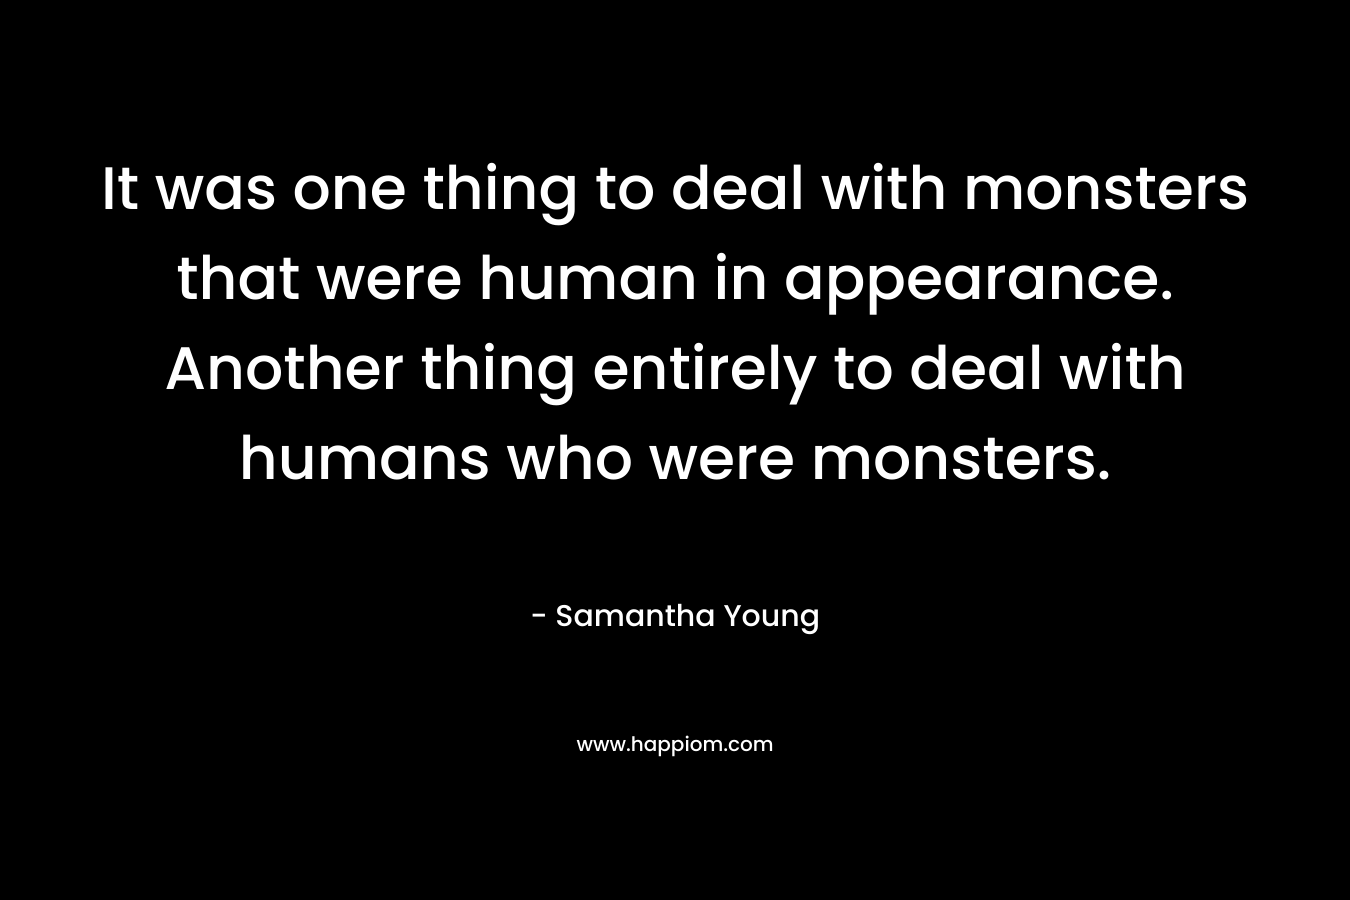 It was one thing to deal with monsters that were human in appearance. Another thing entirely to deal with humans who were monsters.